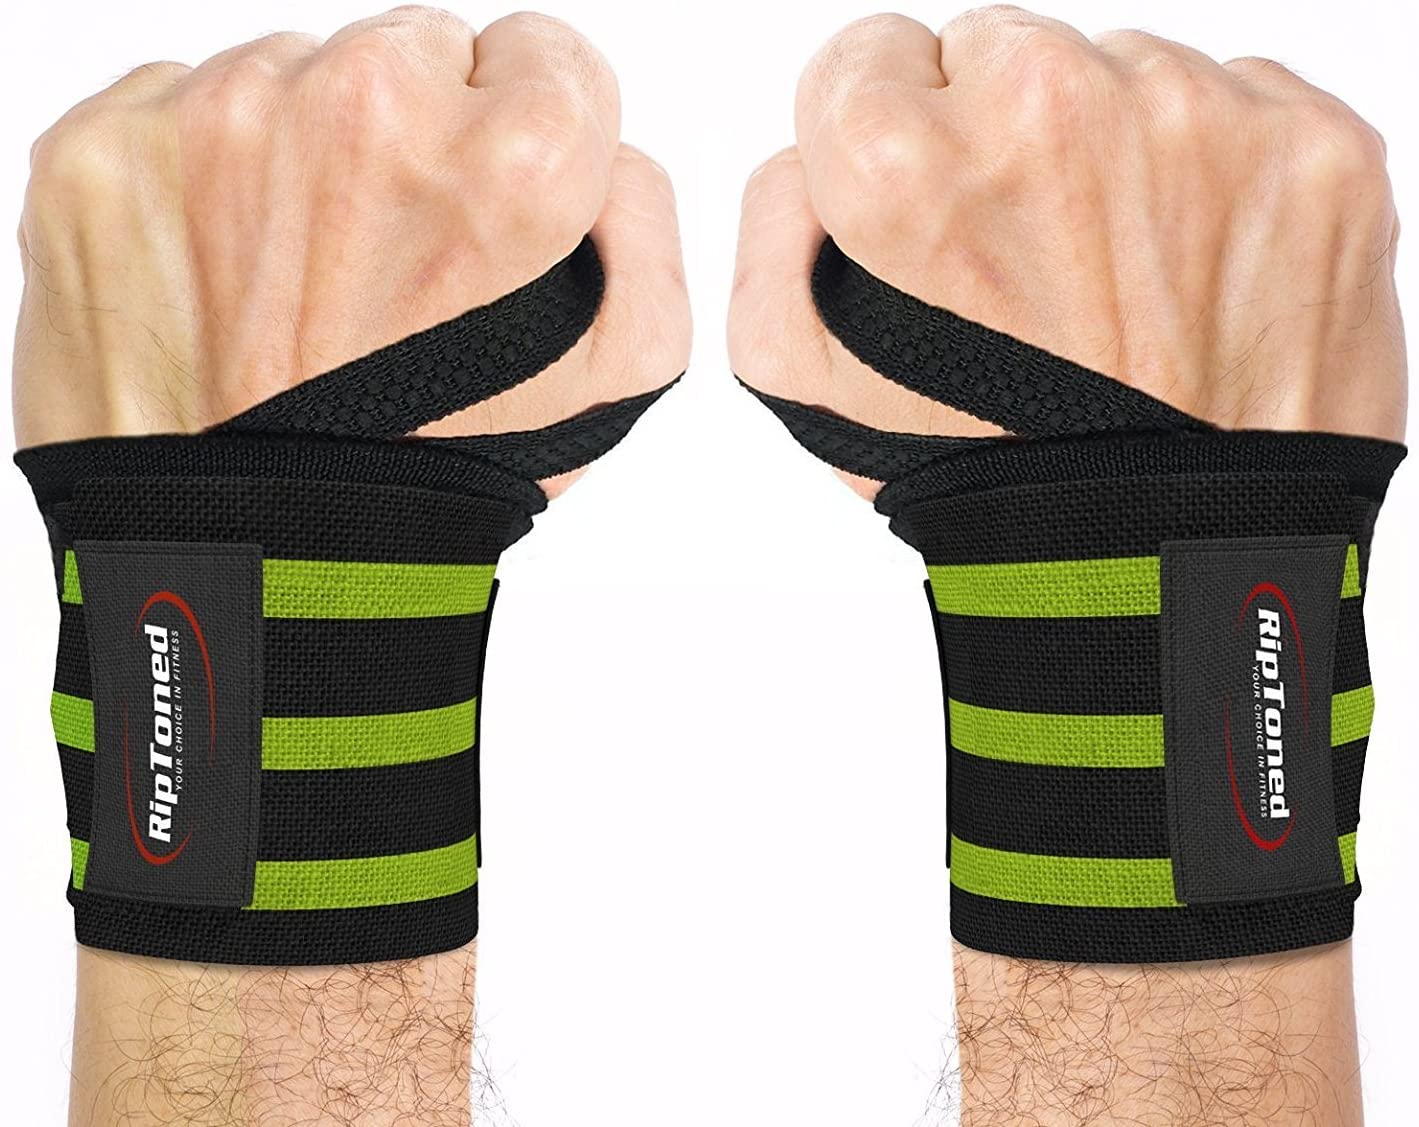 rist Wraps by Rip Toned - 18" Professional Grade with Thumb Loops - Wrist Support Braces for Men & Women - Weight Lifting, Crossfit, Powerlifting, Strength Training - e4cents